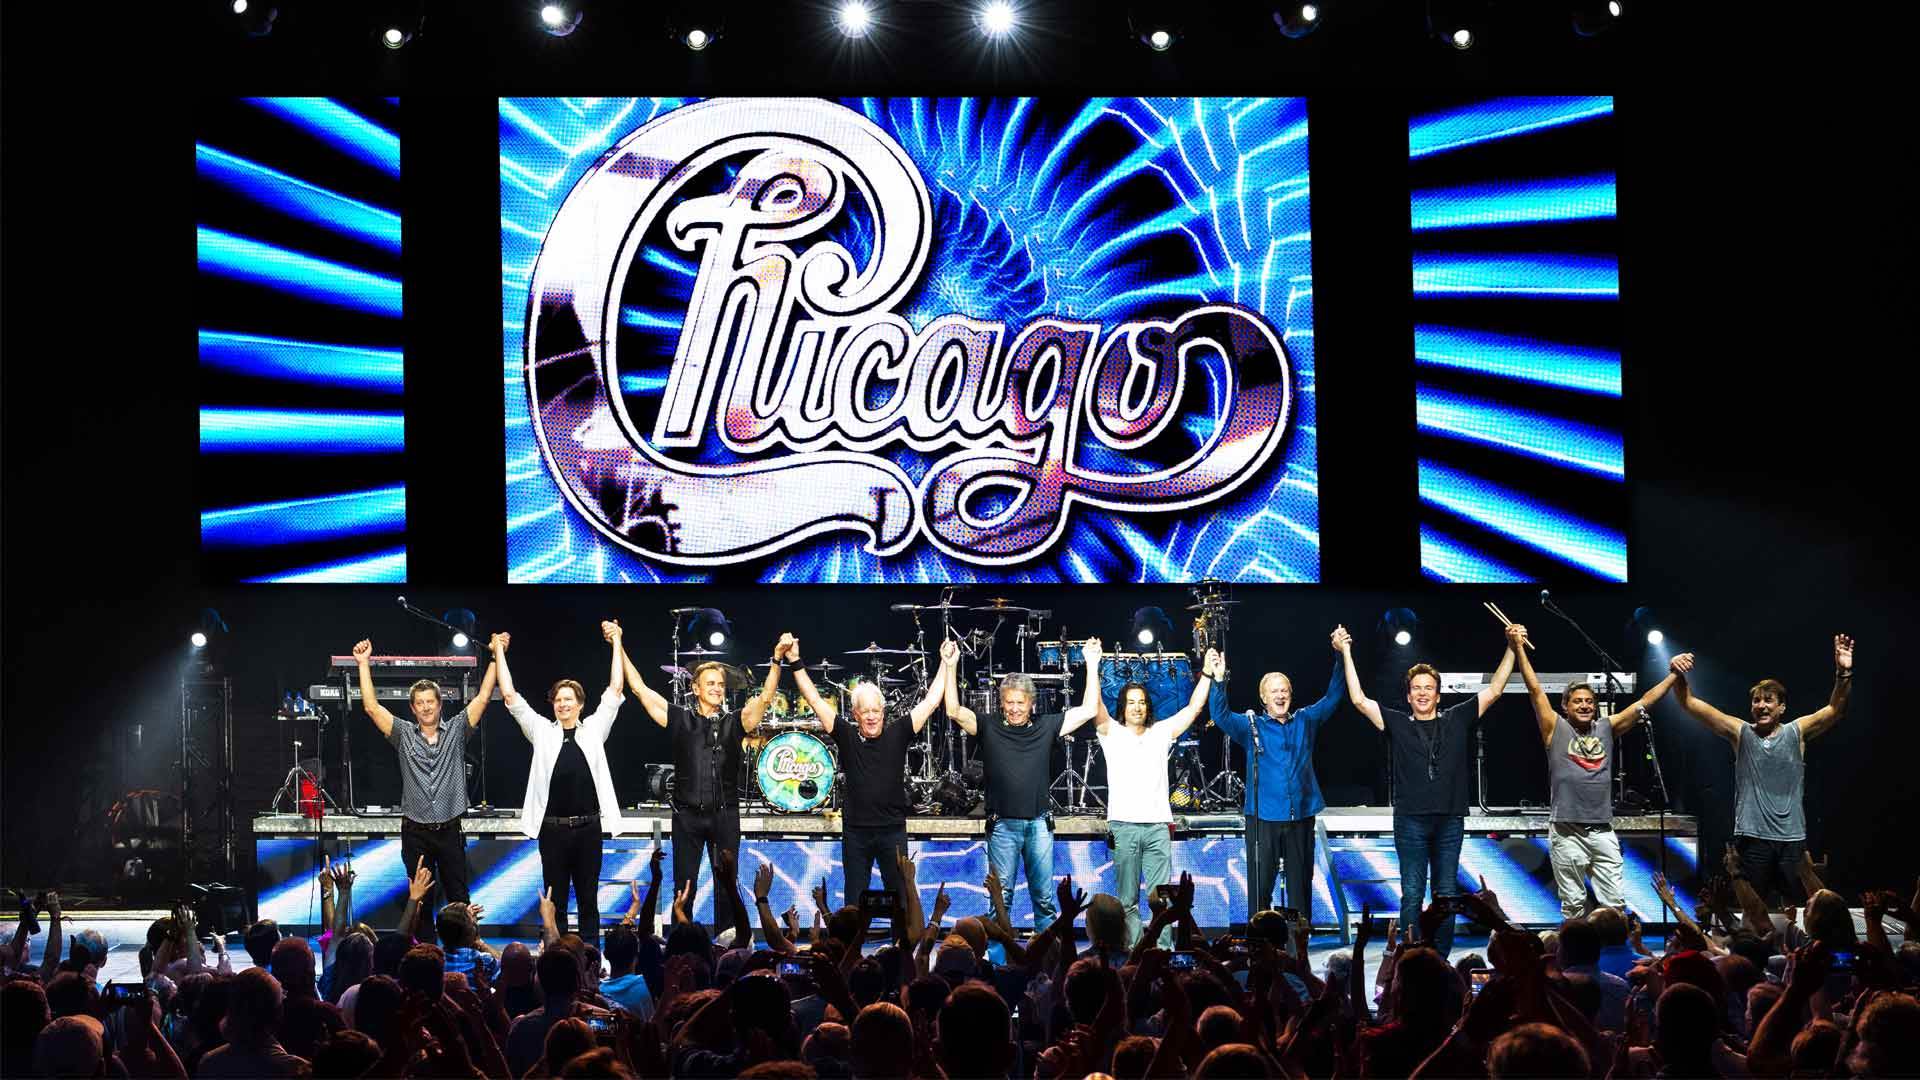 Ten people holding each other's hands above their heads in a line on stage in front of a large audience. Behind them is a large screen that says "Chicago".